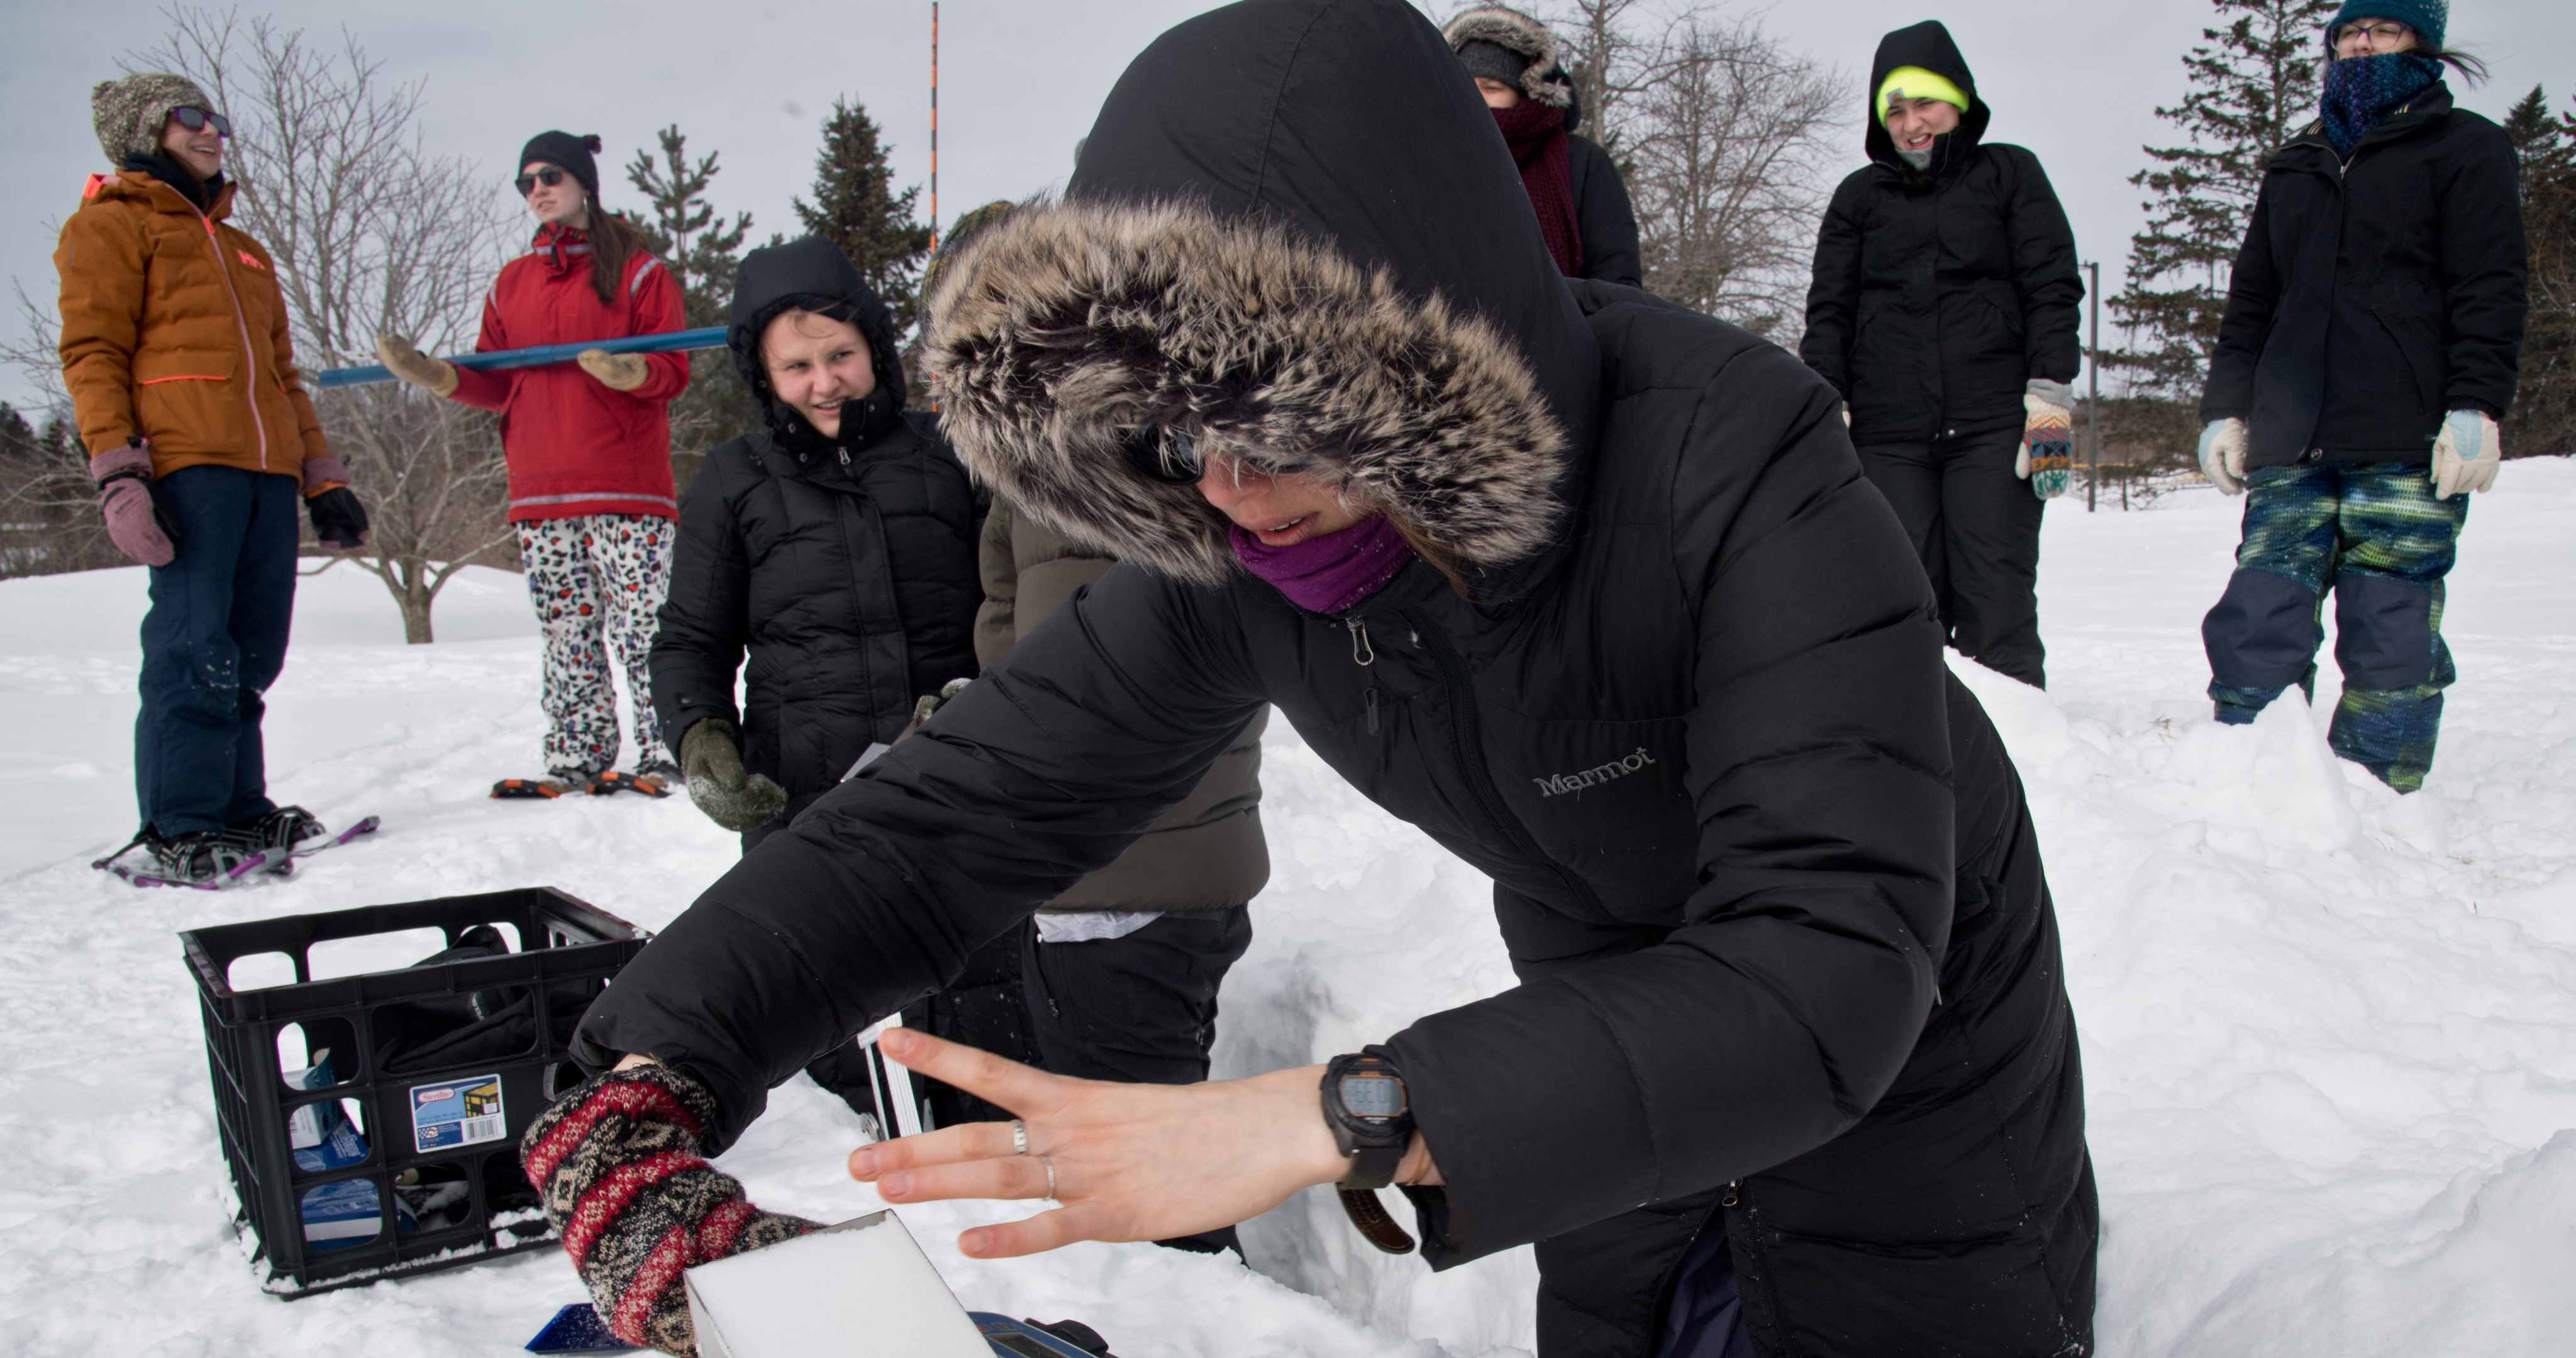 A student in the snow collecting a sample